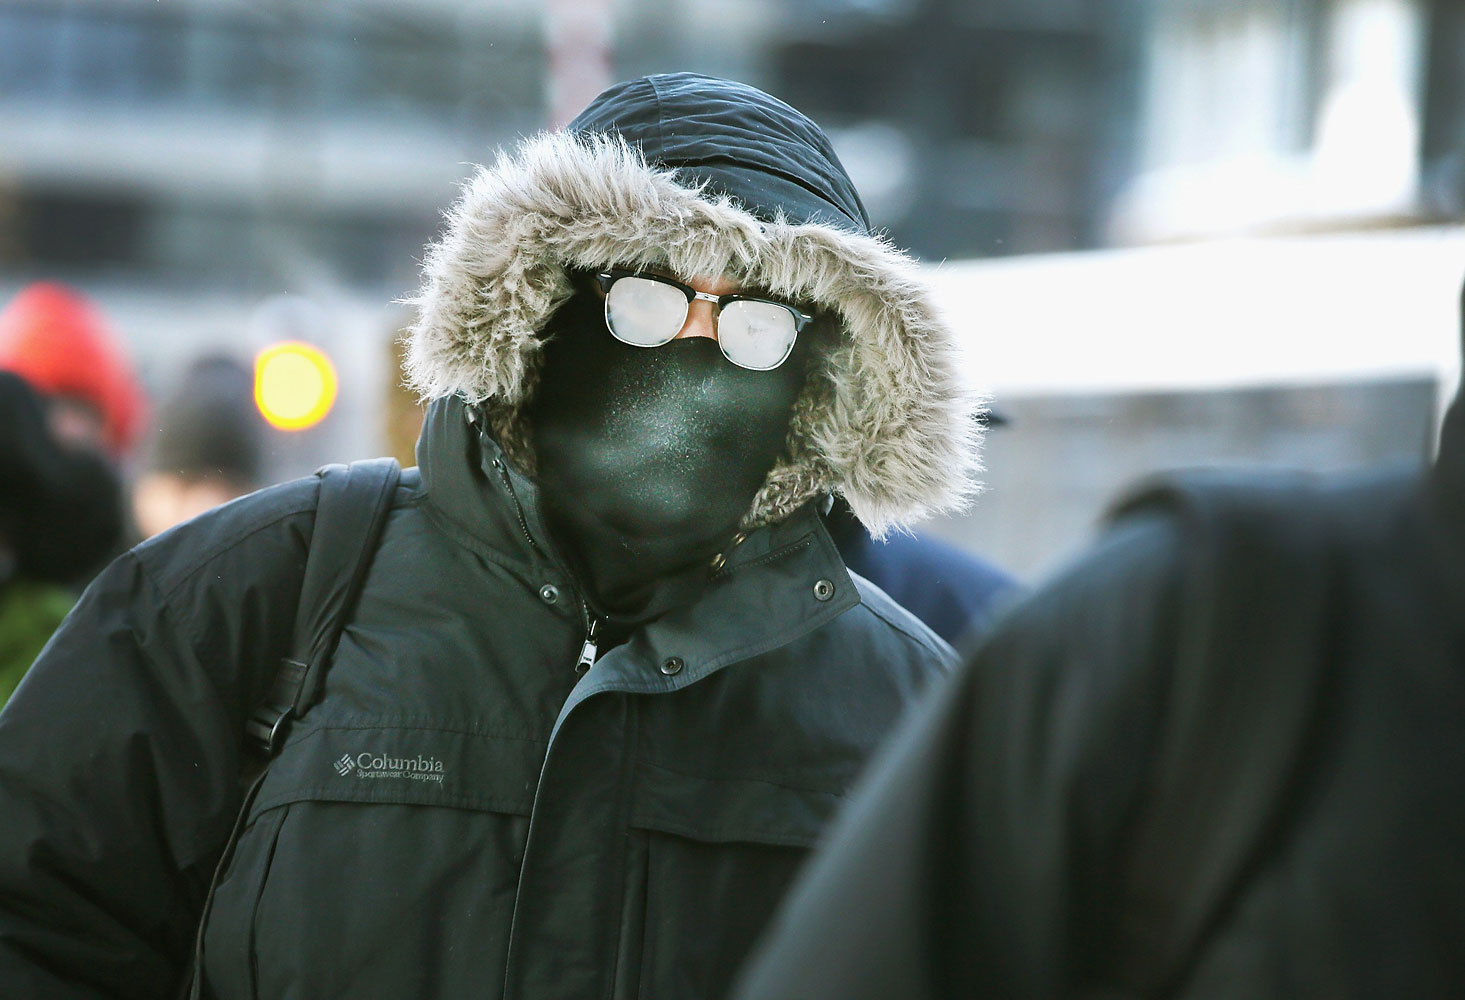 Commuters make a sub-zero trek to offices in the Loop on Jan. 6, 2014 in Chicago, Ill.